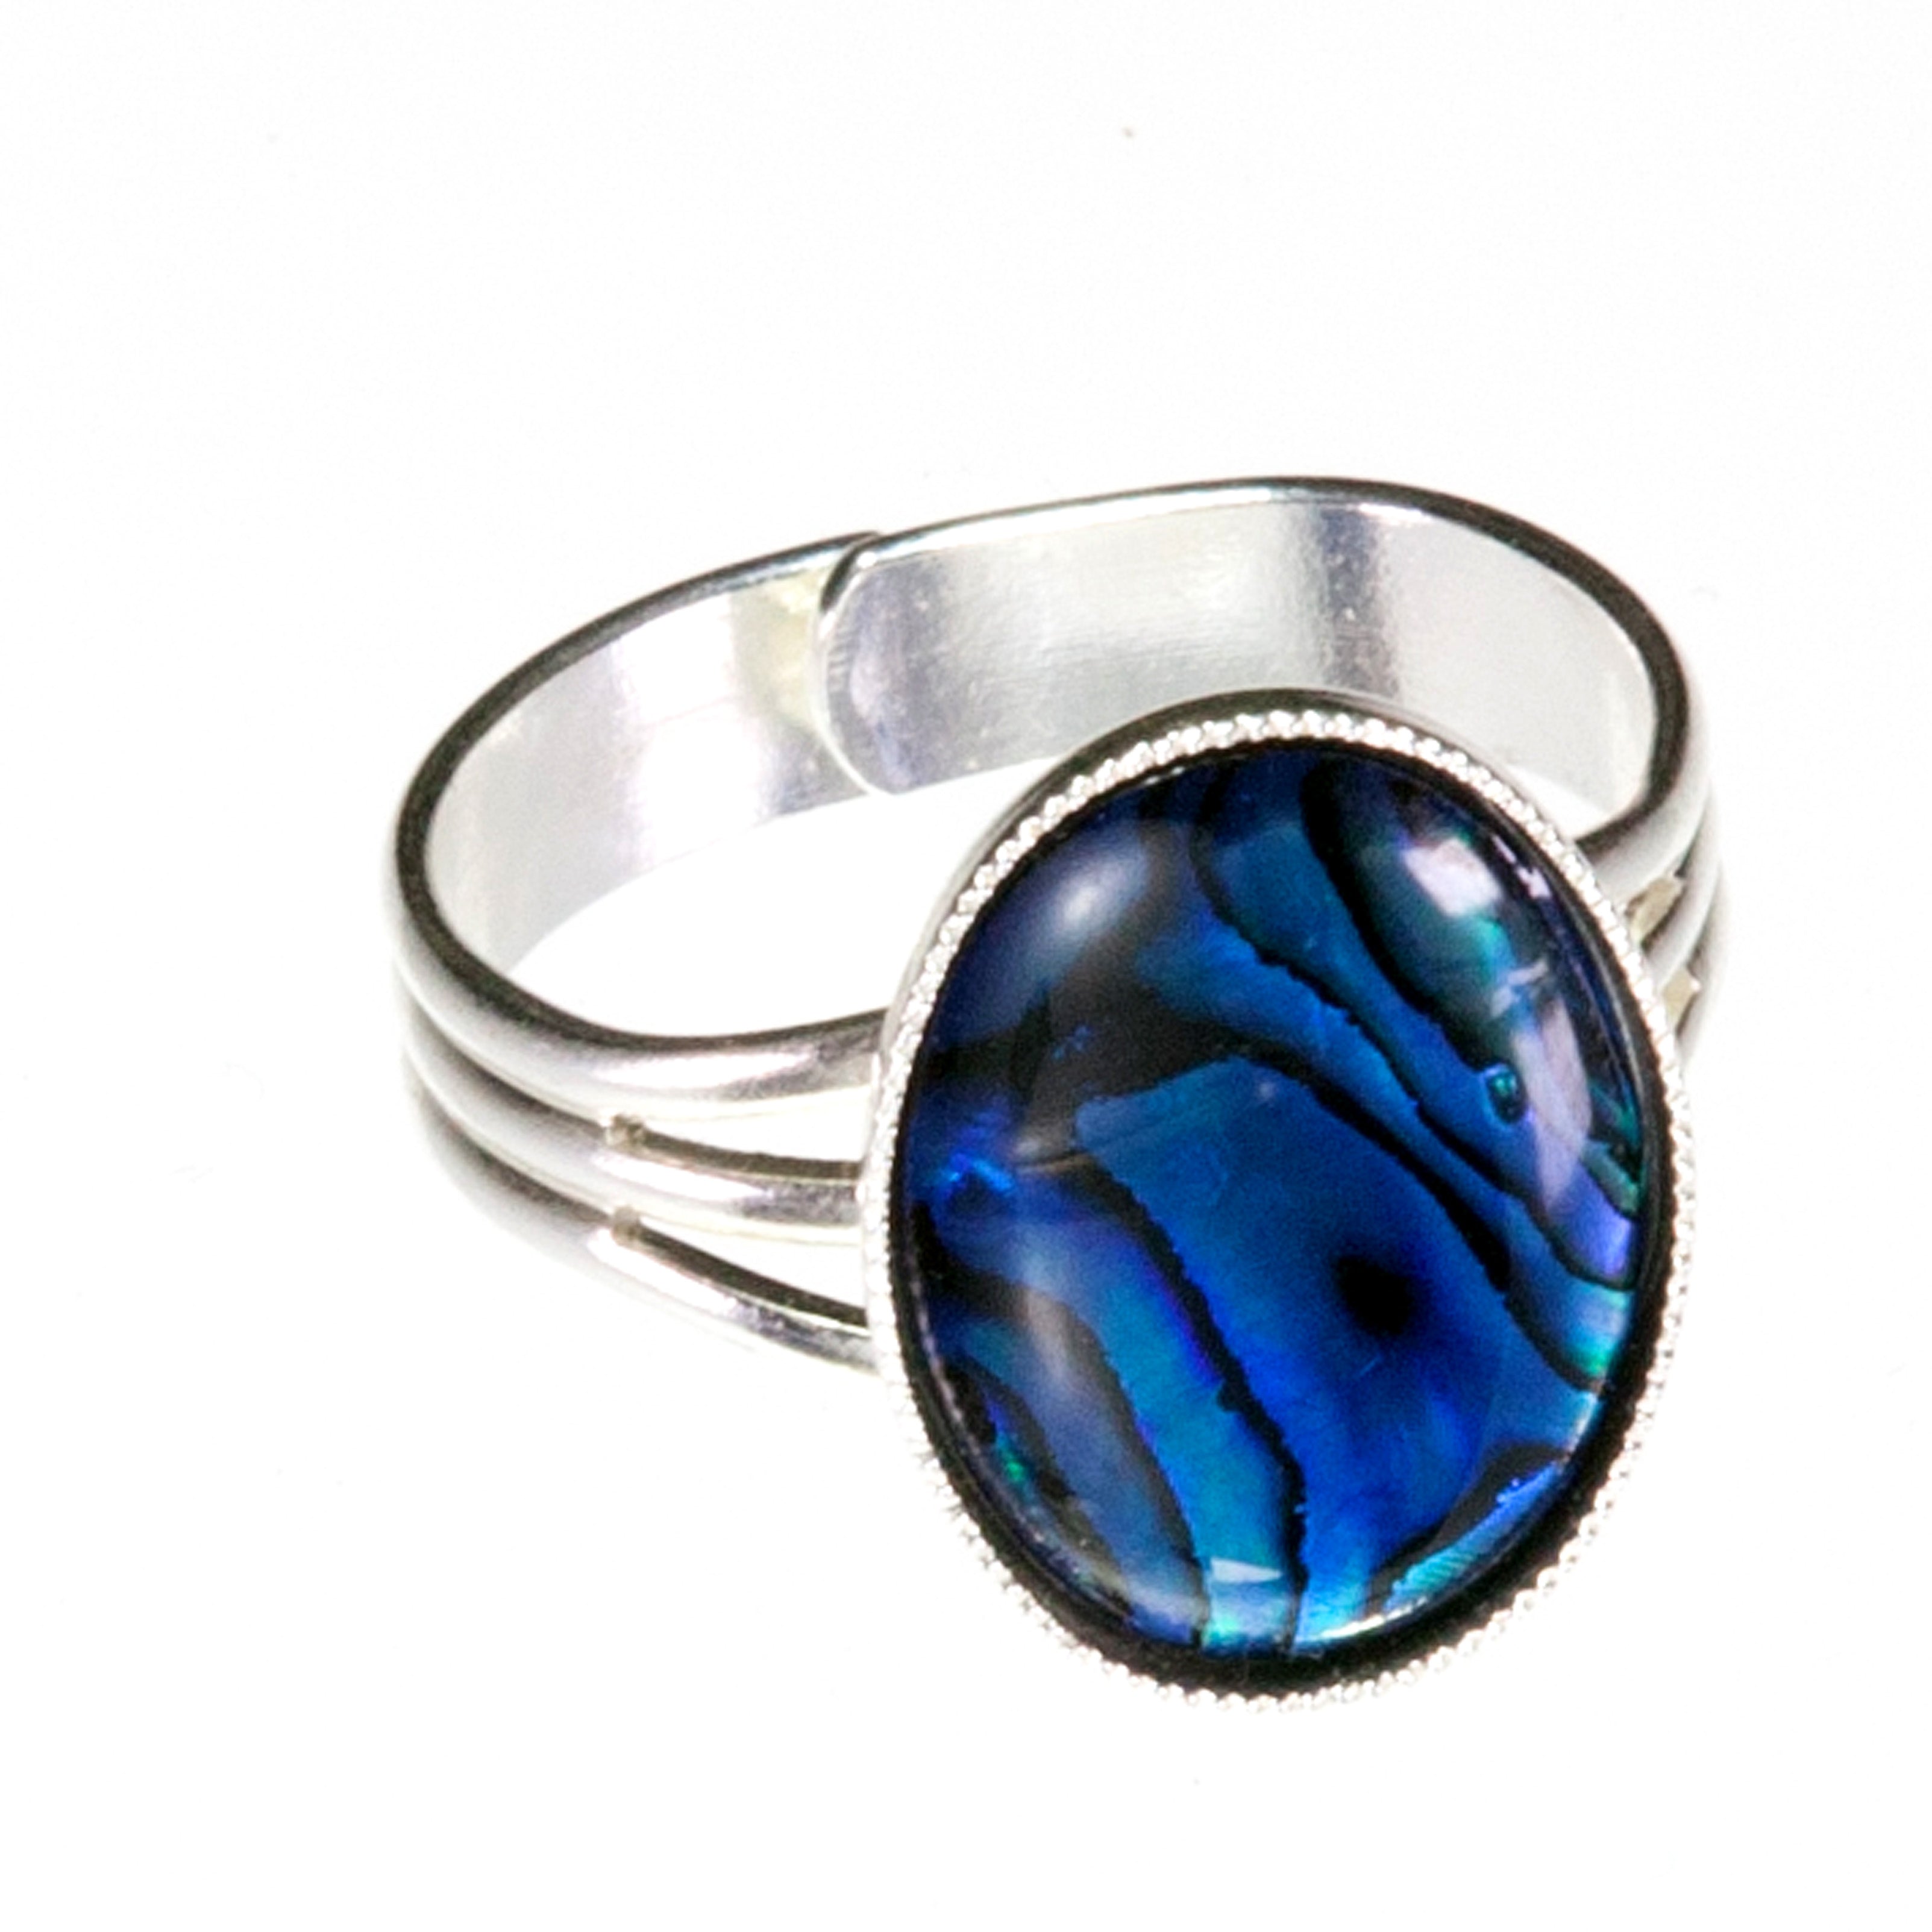 Adjustable dress ring will compliment any outfit. Suitable for medium to large fingers the 18mm x 13mm Blue Abalone Shell cabochon makes a statement without being over powering.  Abalone is believed to strengthen the immune system and increase stamina.     It is thought to enhance the four C's  Communication  Cooperation  Commitment  Compromise     leading to harmony and balance.     The Abalone shell has been tossed and turned in the ocean for many years and through this process, its true beauty